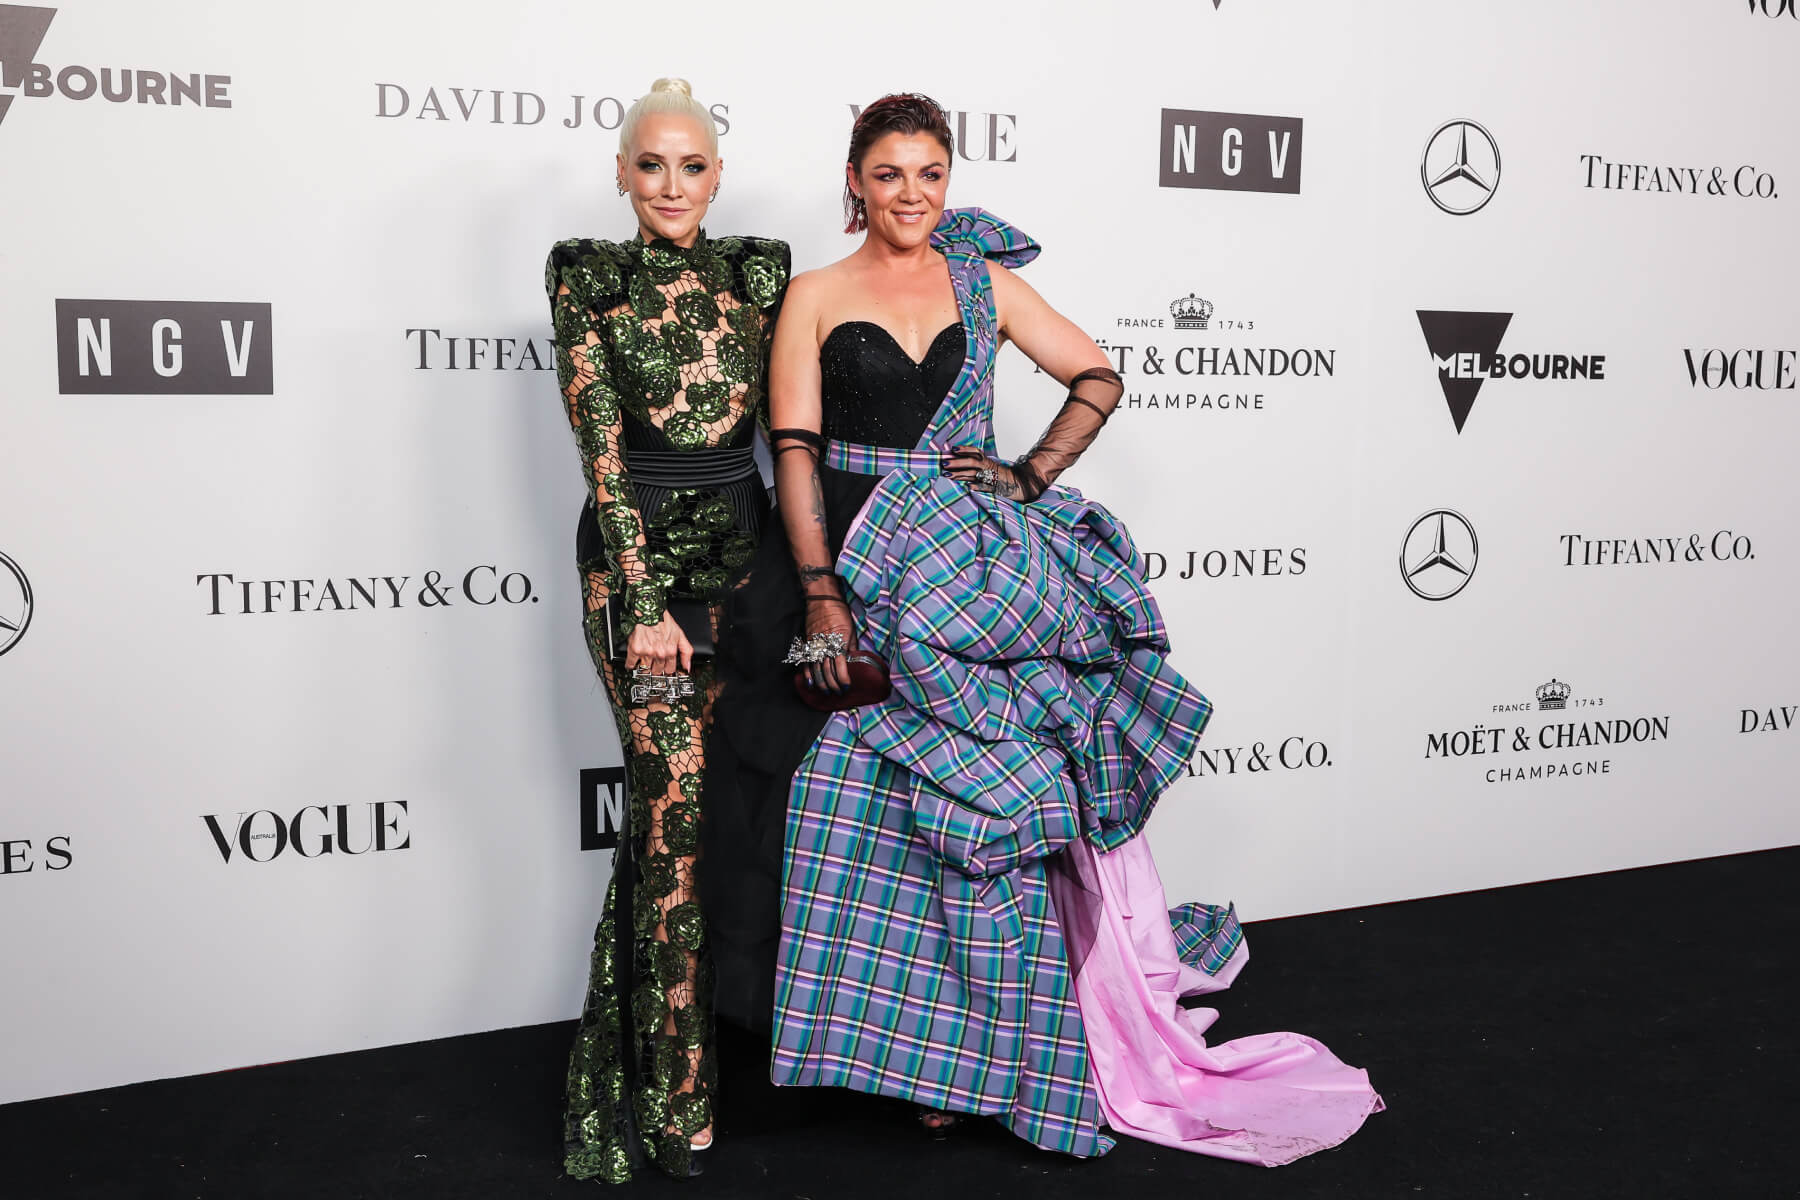 A Fashion Night Like No Other The NGV Gala Opening